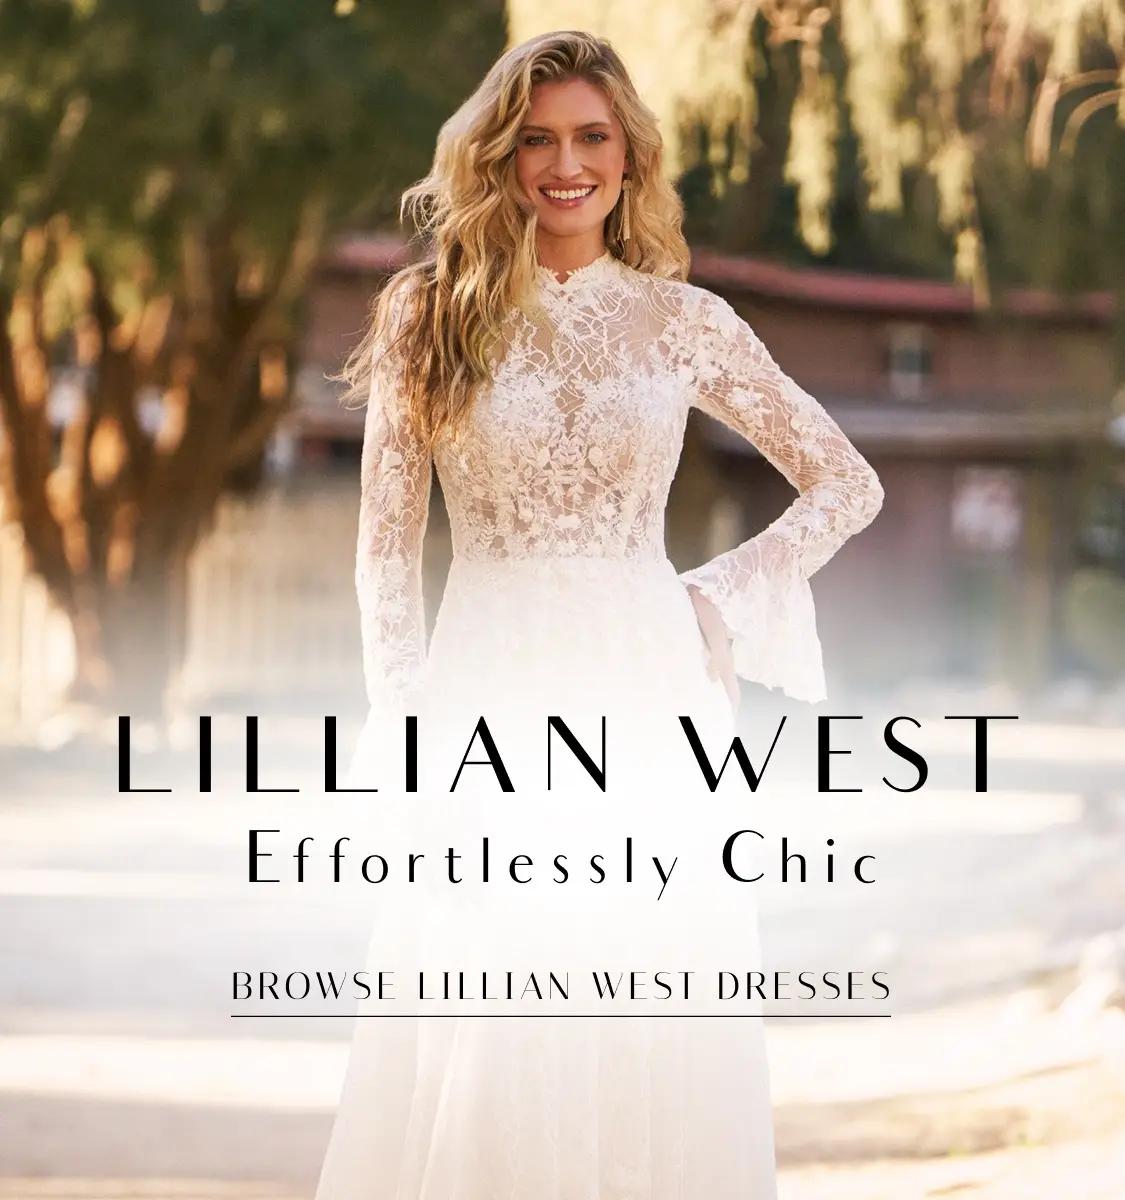 Mobile banner featuring Lillian West dresses